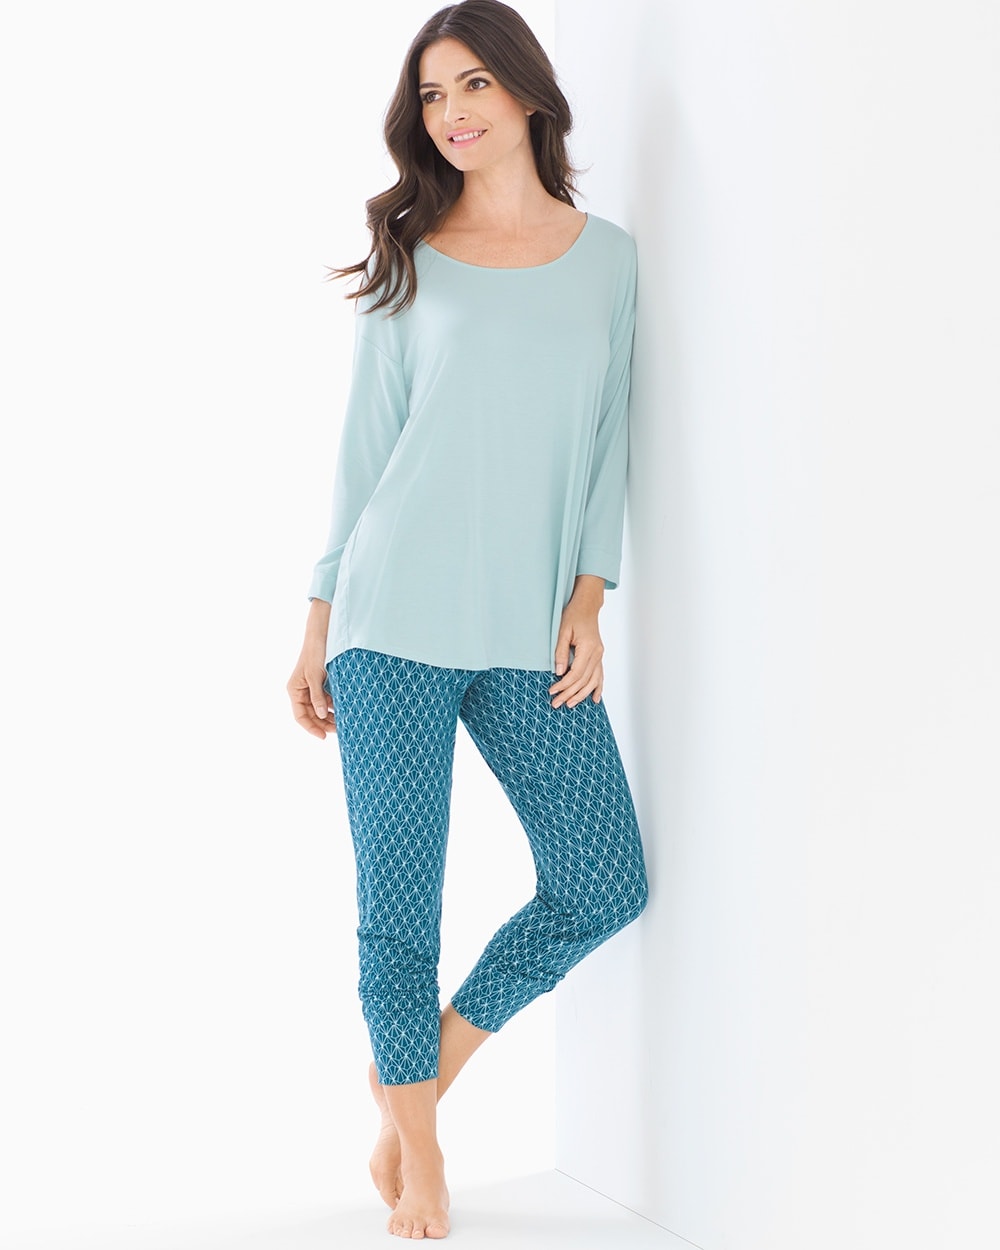 Cool Nights Relaxed Fit Pajama Set Feather Geo Teal